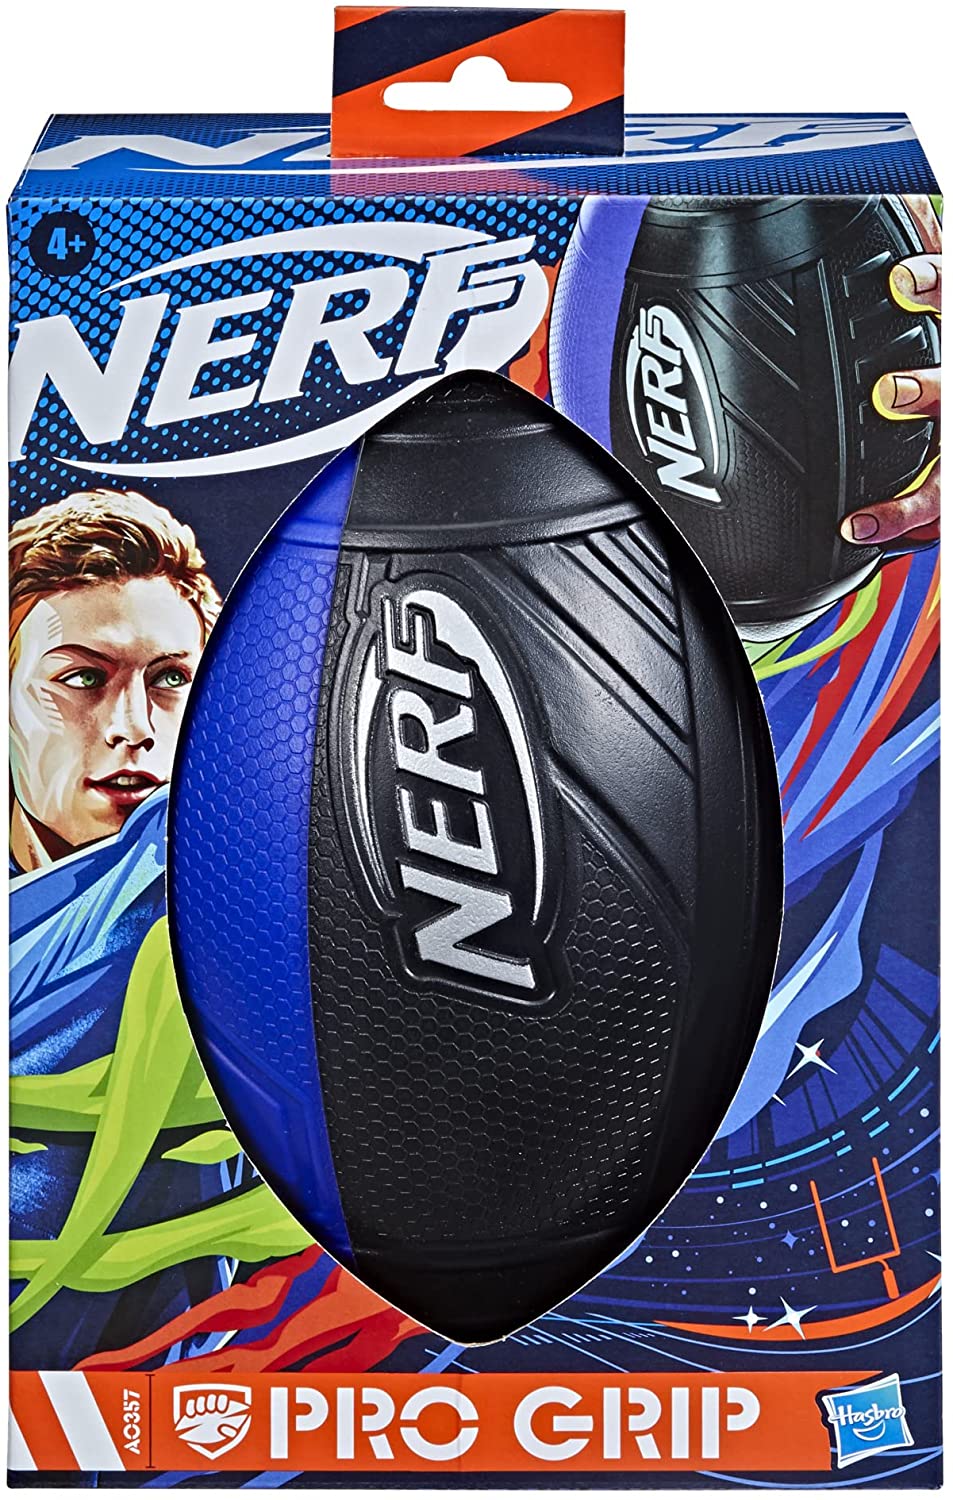 Nerf Pro Grip Classic Foam Football, Blue - Easy to Catch and Throw and Indoor Outdoor Play